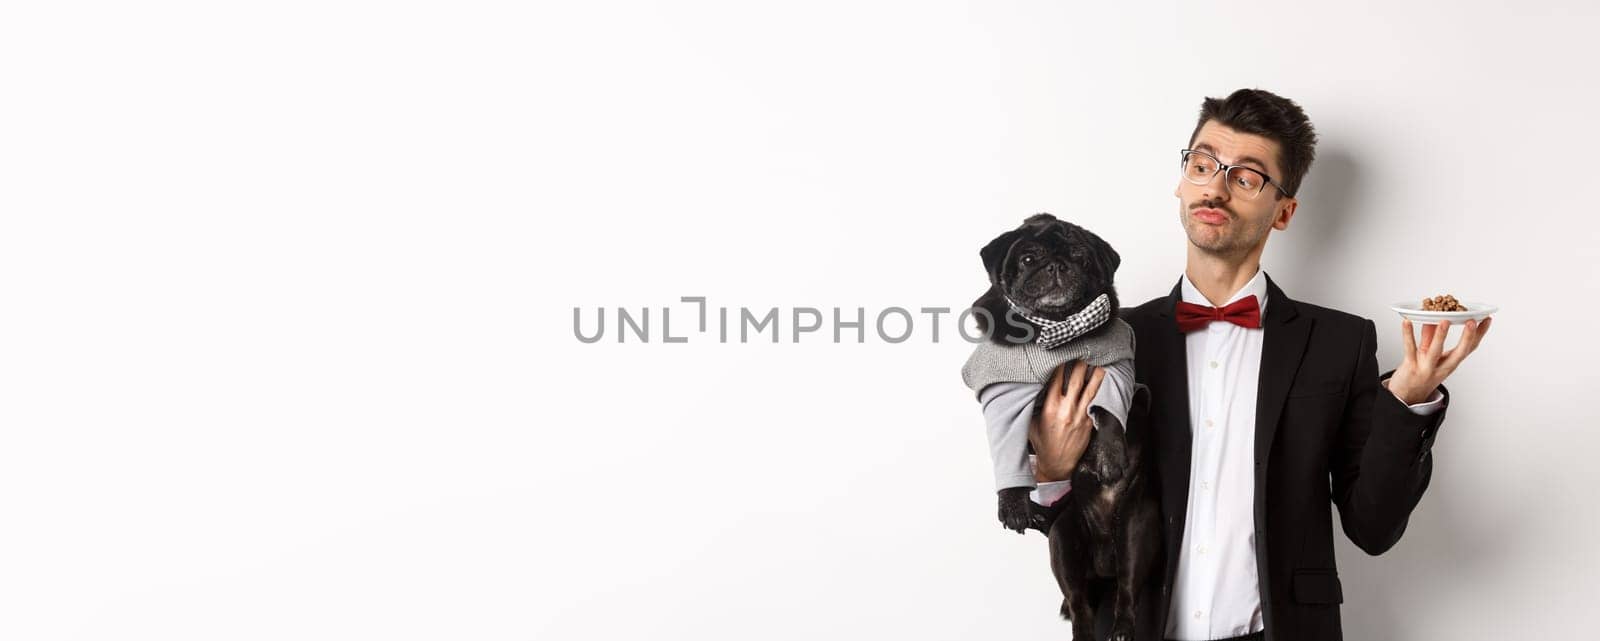 Handsome young dog owner in fancy suit holding cute black pug and plate with animal food, standing over white background.